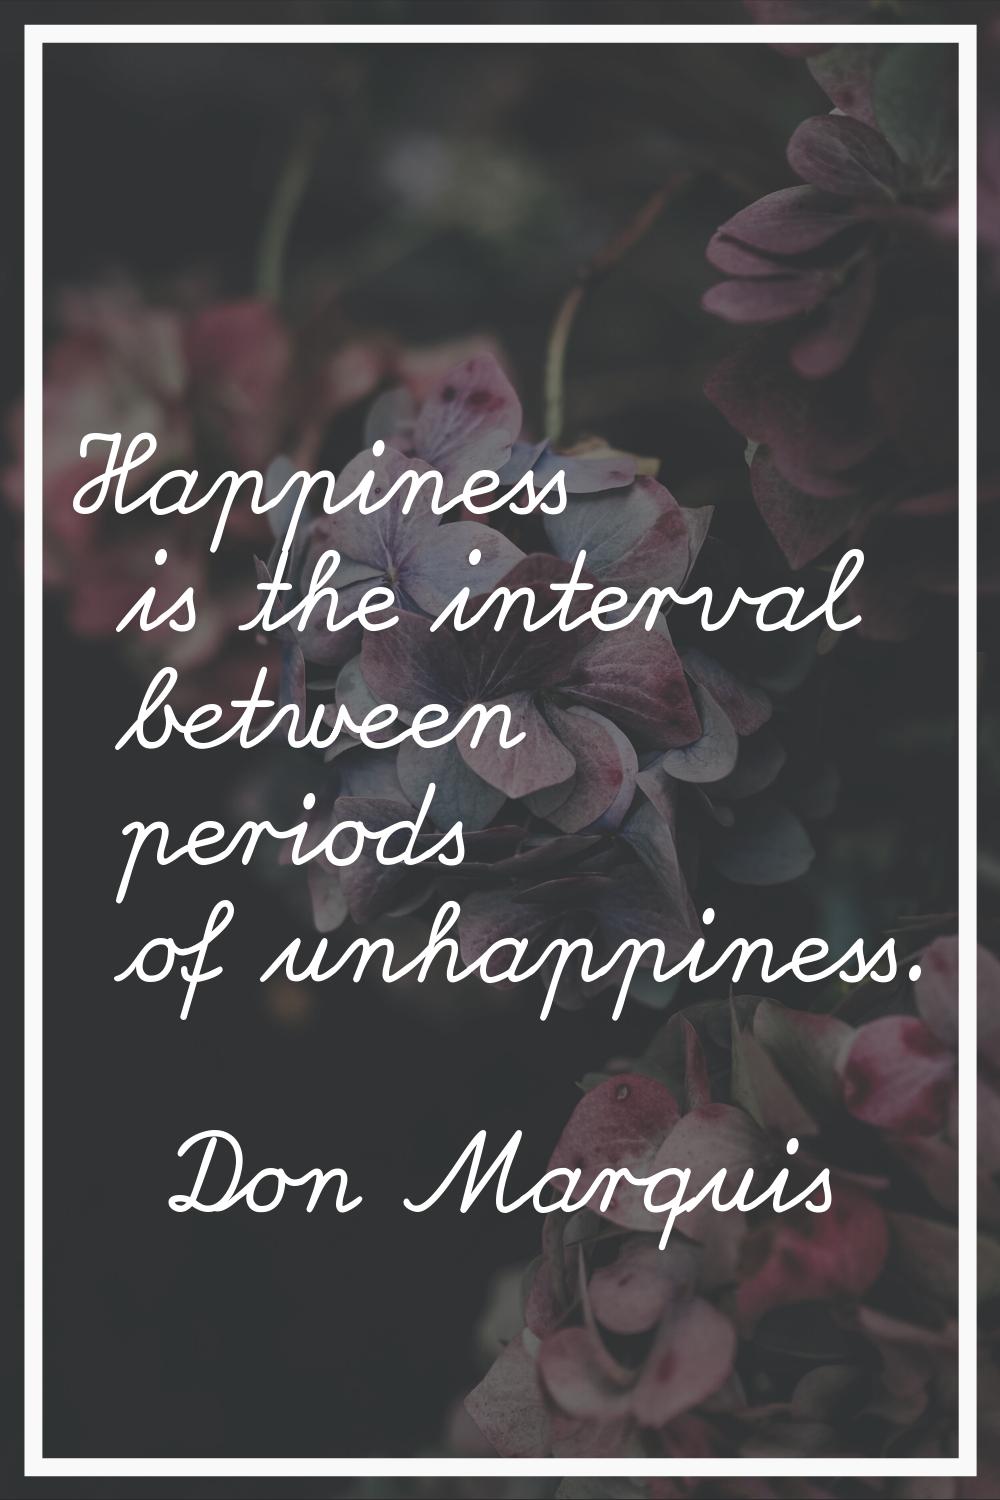 Happiness is the interval between periods of unhappiness.